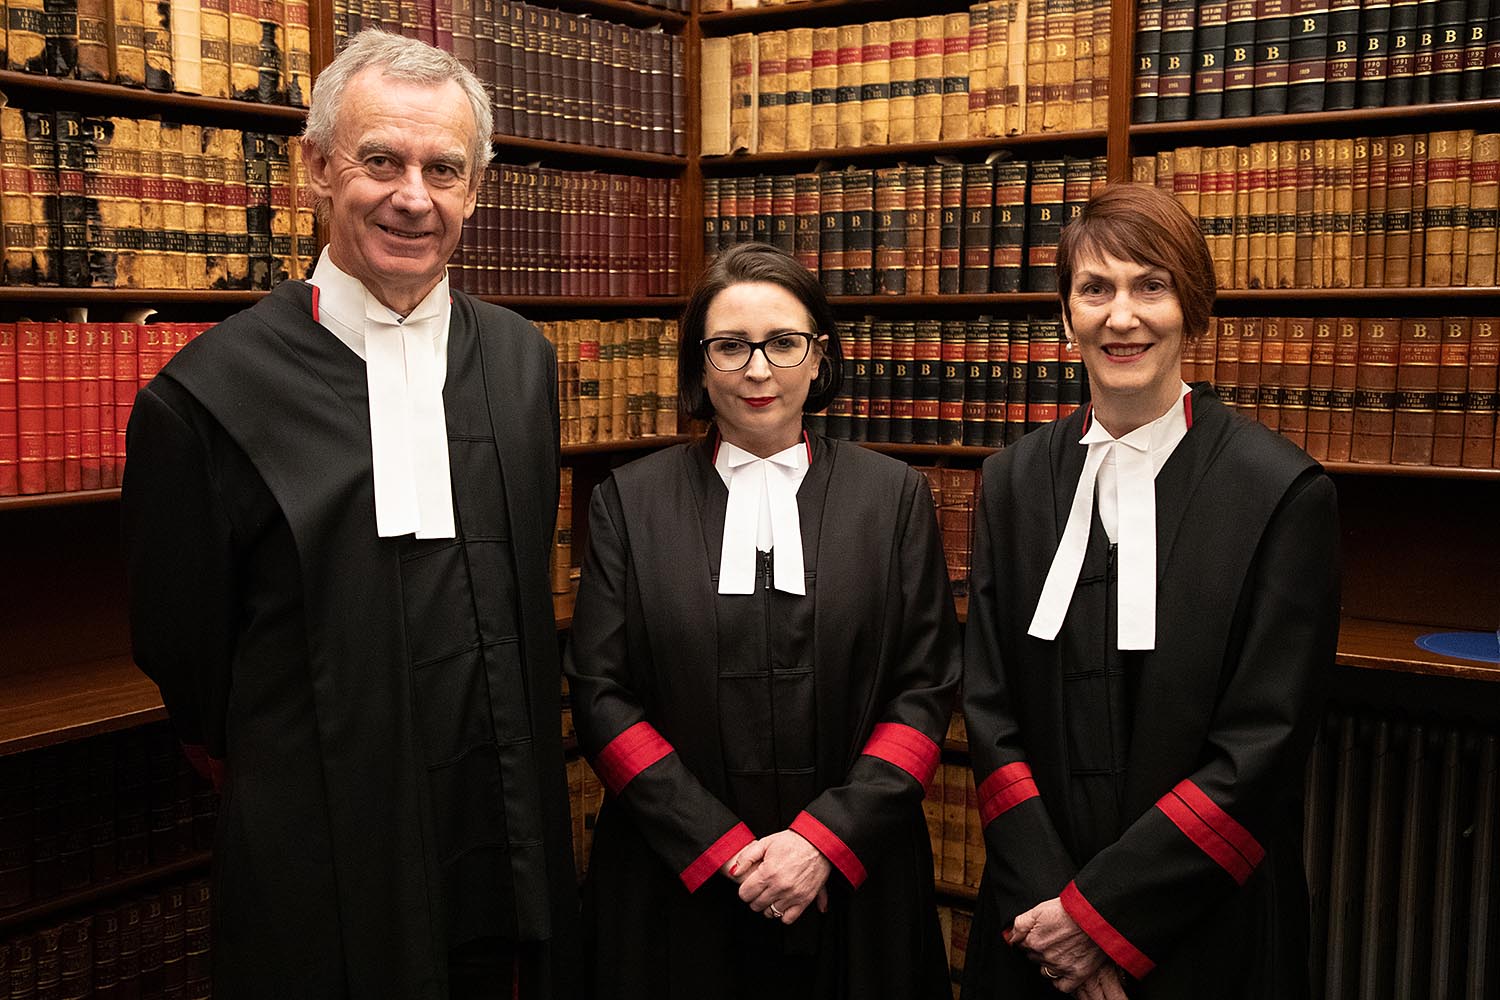 Justice Riordan, Justice Nichols and Chief Justice Ferguson before the welcome ceremony.